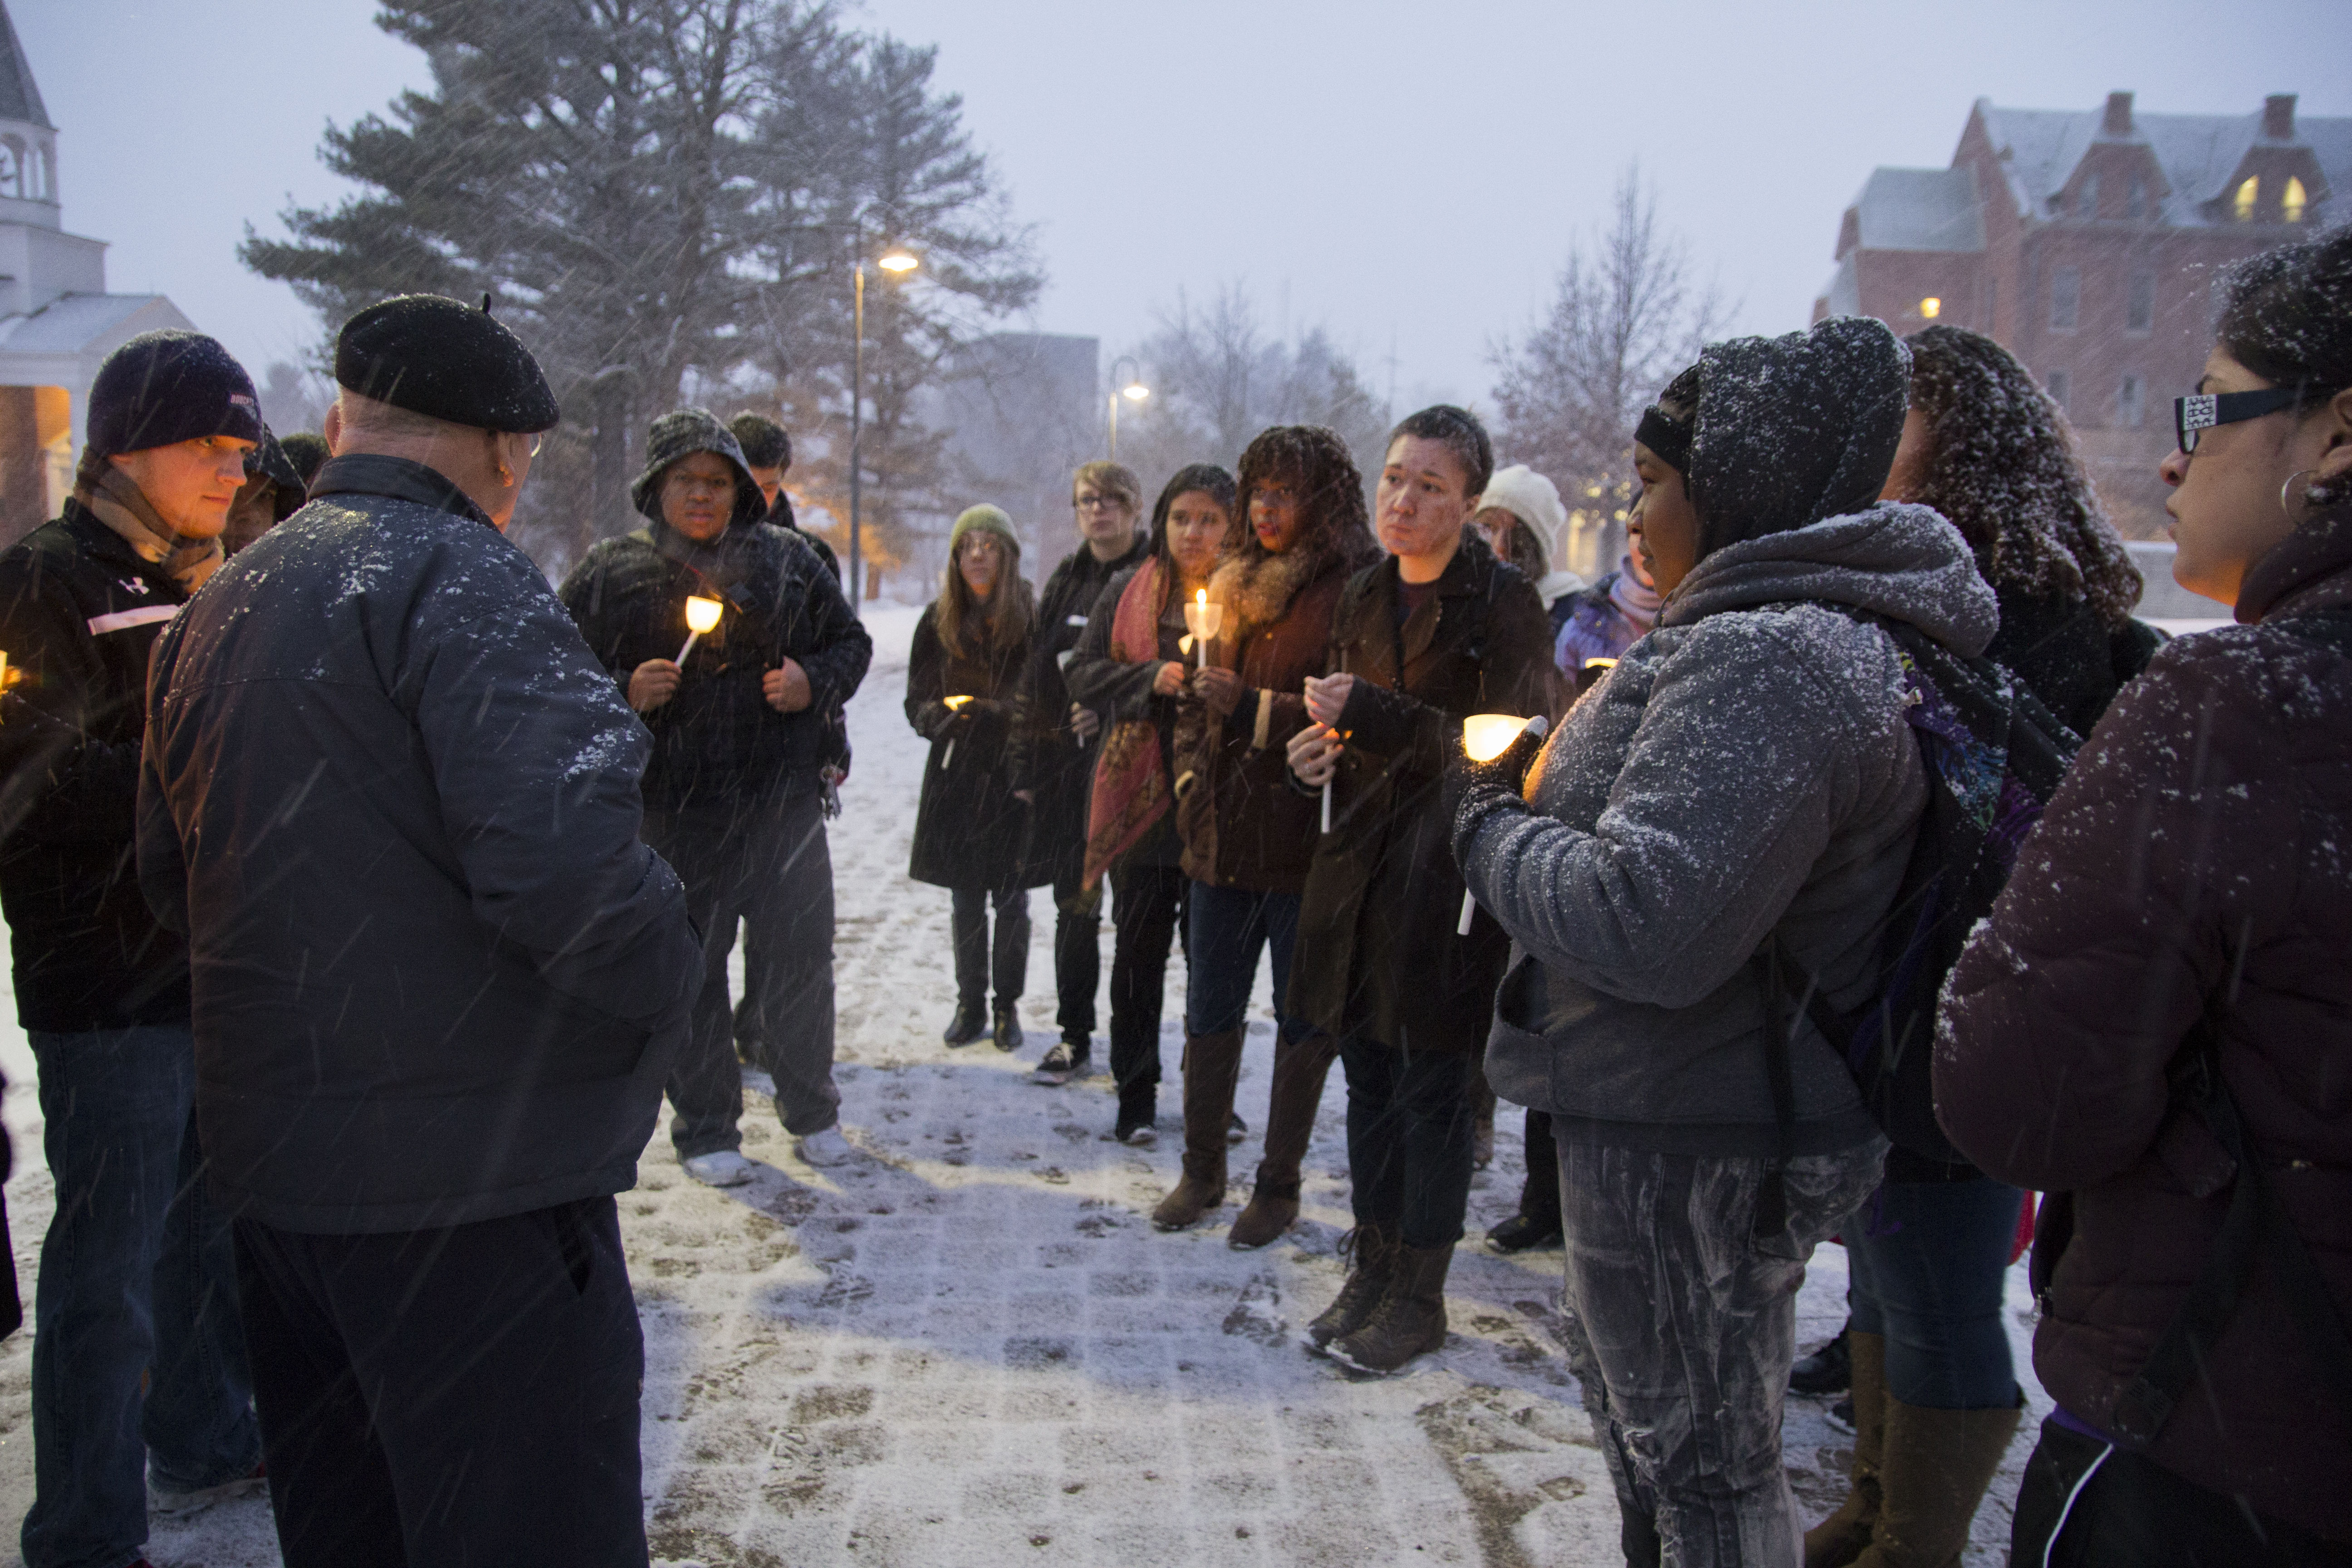 The Rev. Richard Thomas gathers with current students in January to honor Martin Luther King Jr. and Nelson Mandela and to reflect on their contributions to freedom and equality during MLK week at Cornell. Tiffany Monreal ’14